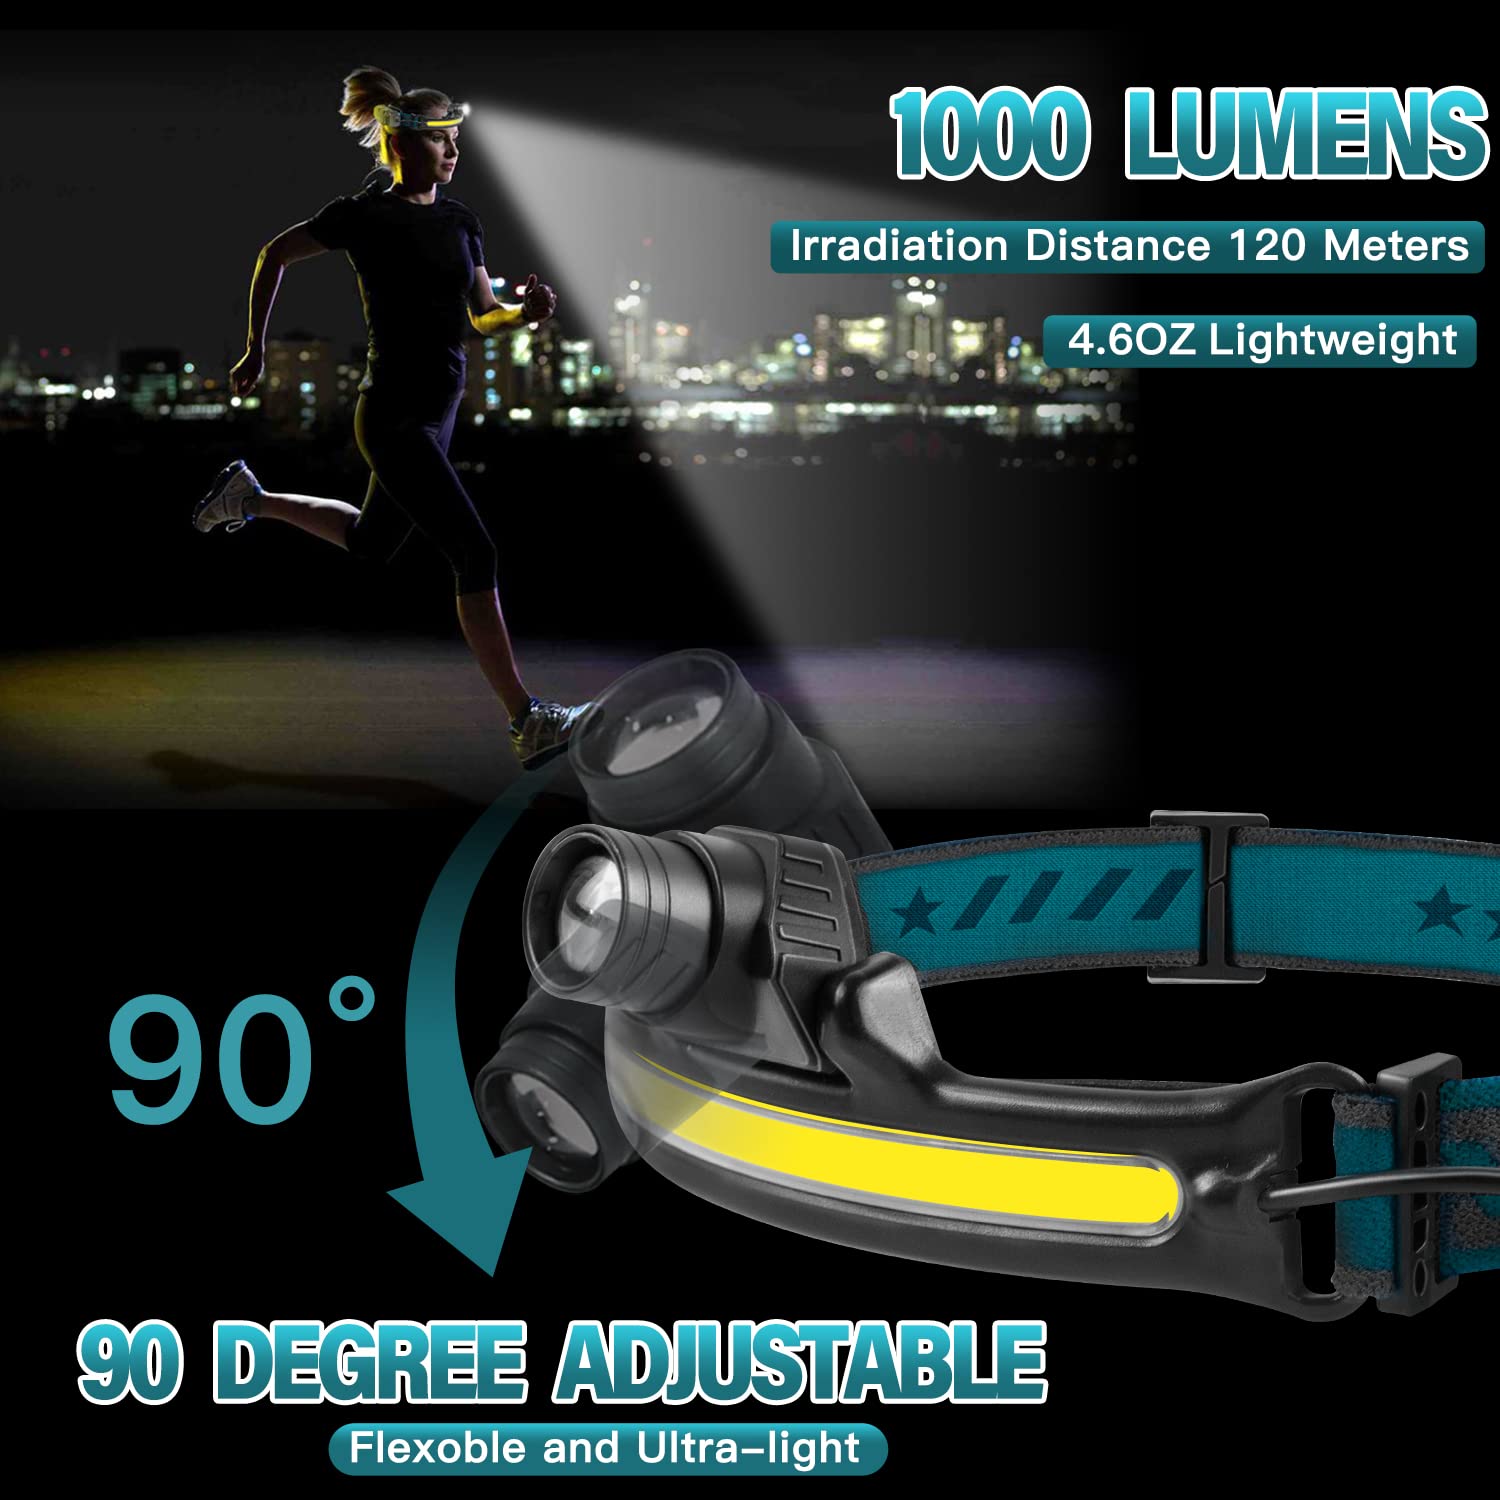 AOXLFU Headlamp Rechargeable 2 Pack 1000 Lumen,with 270° Wide Beam Headlights with Motion Sensor Super Bright 6 Modes Lightweight Waterproof for Outdoor Running Camping Hiking Fishing